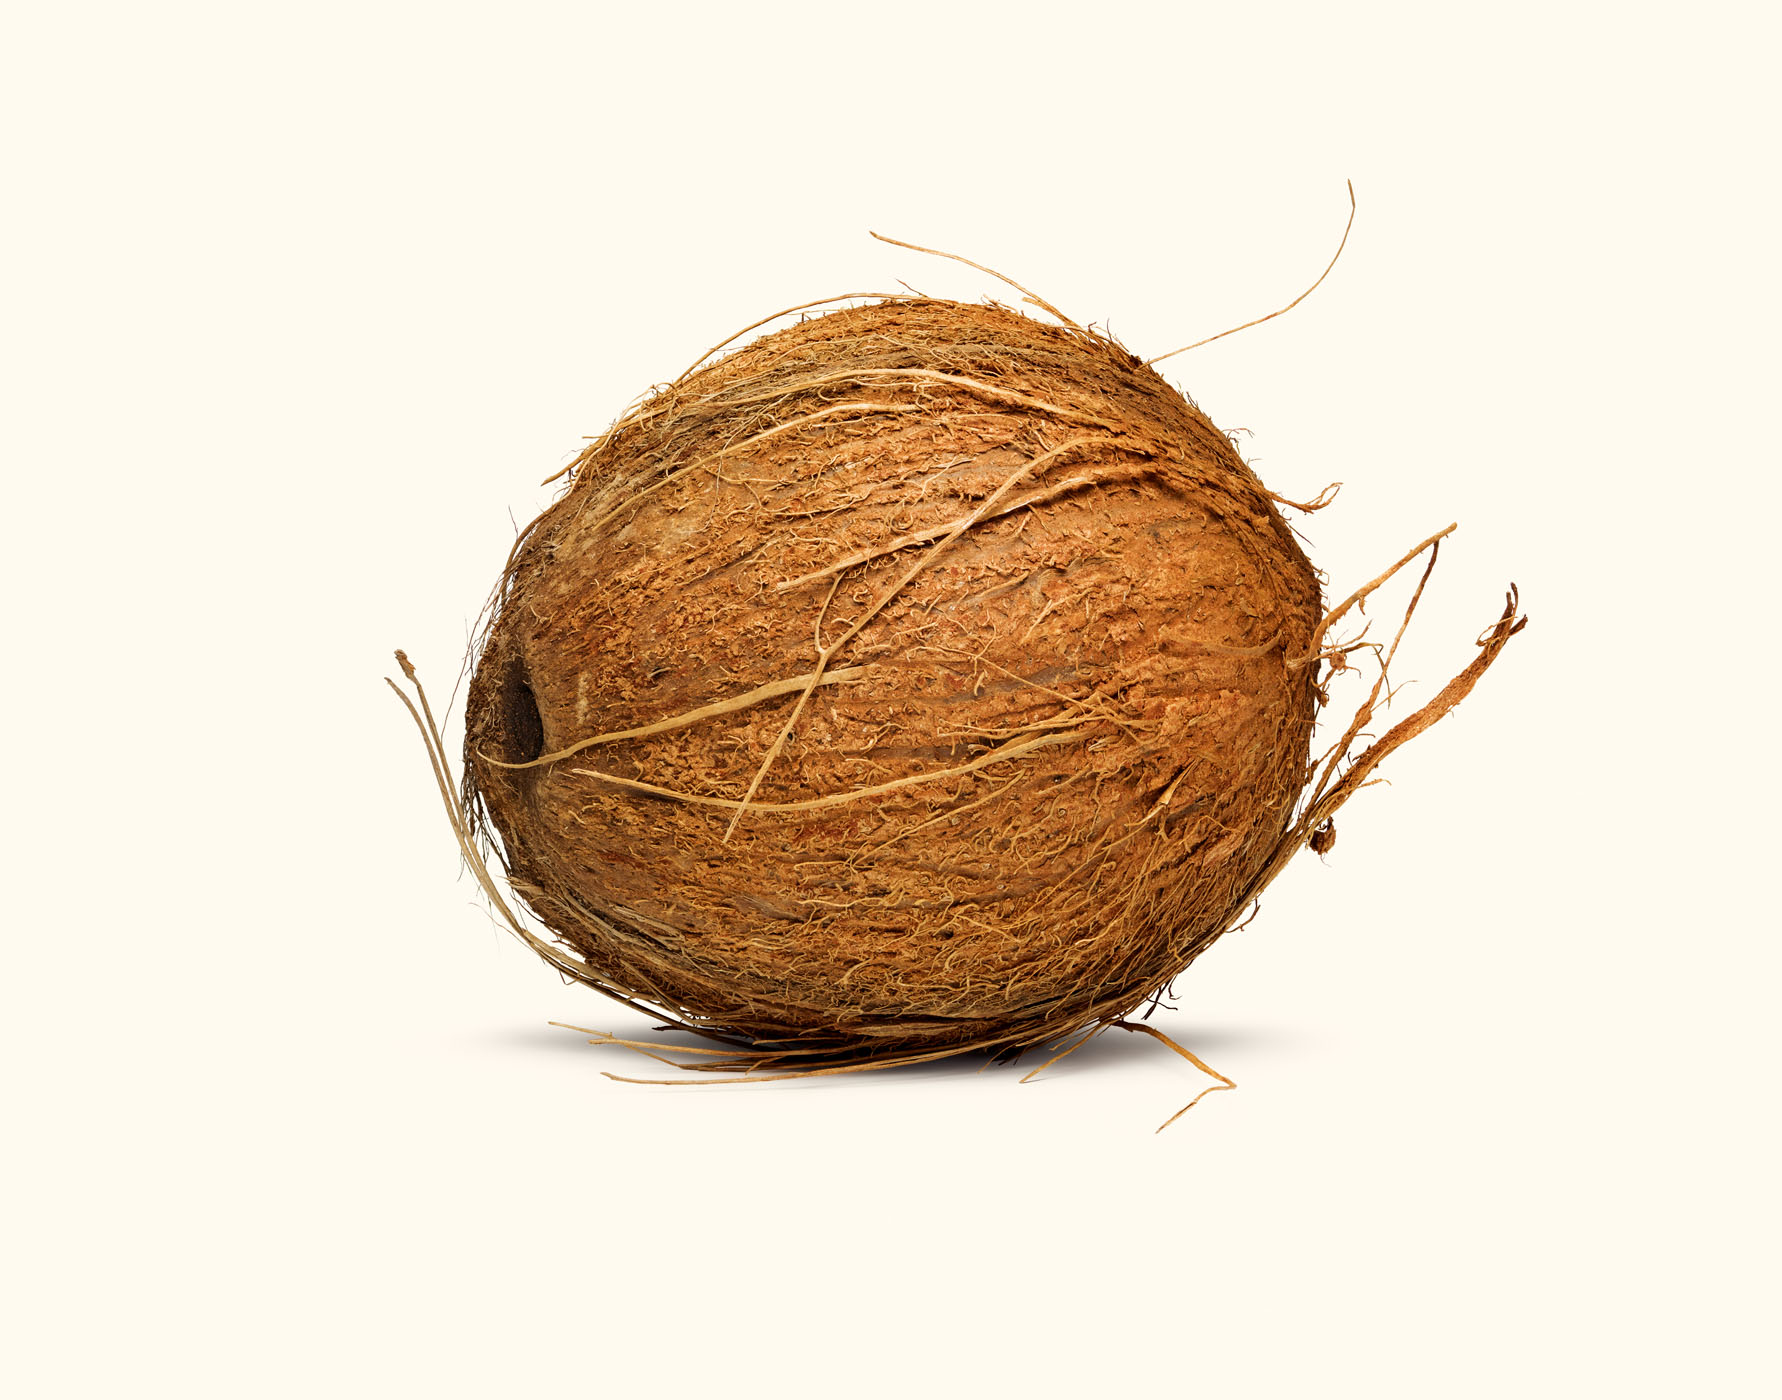 Coconut on studio background by Alexander Kent London based still life and product photographer.